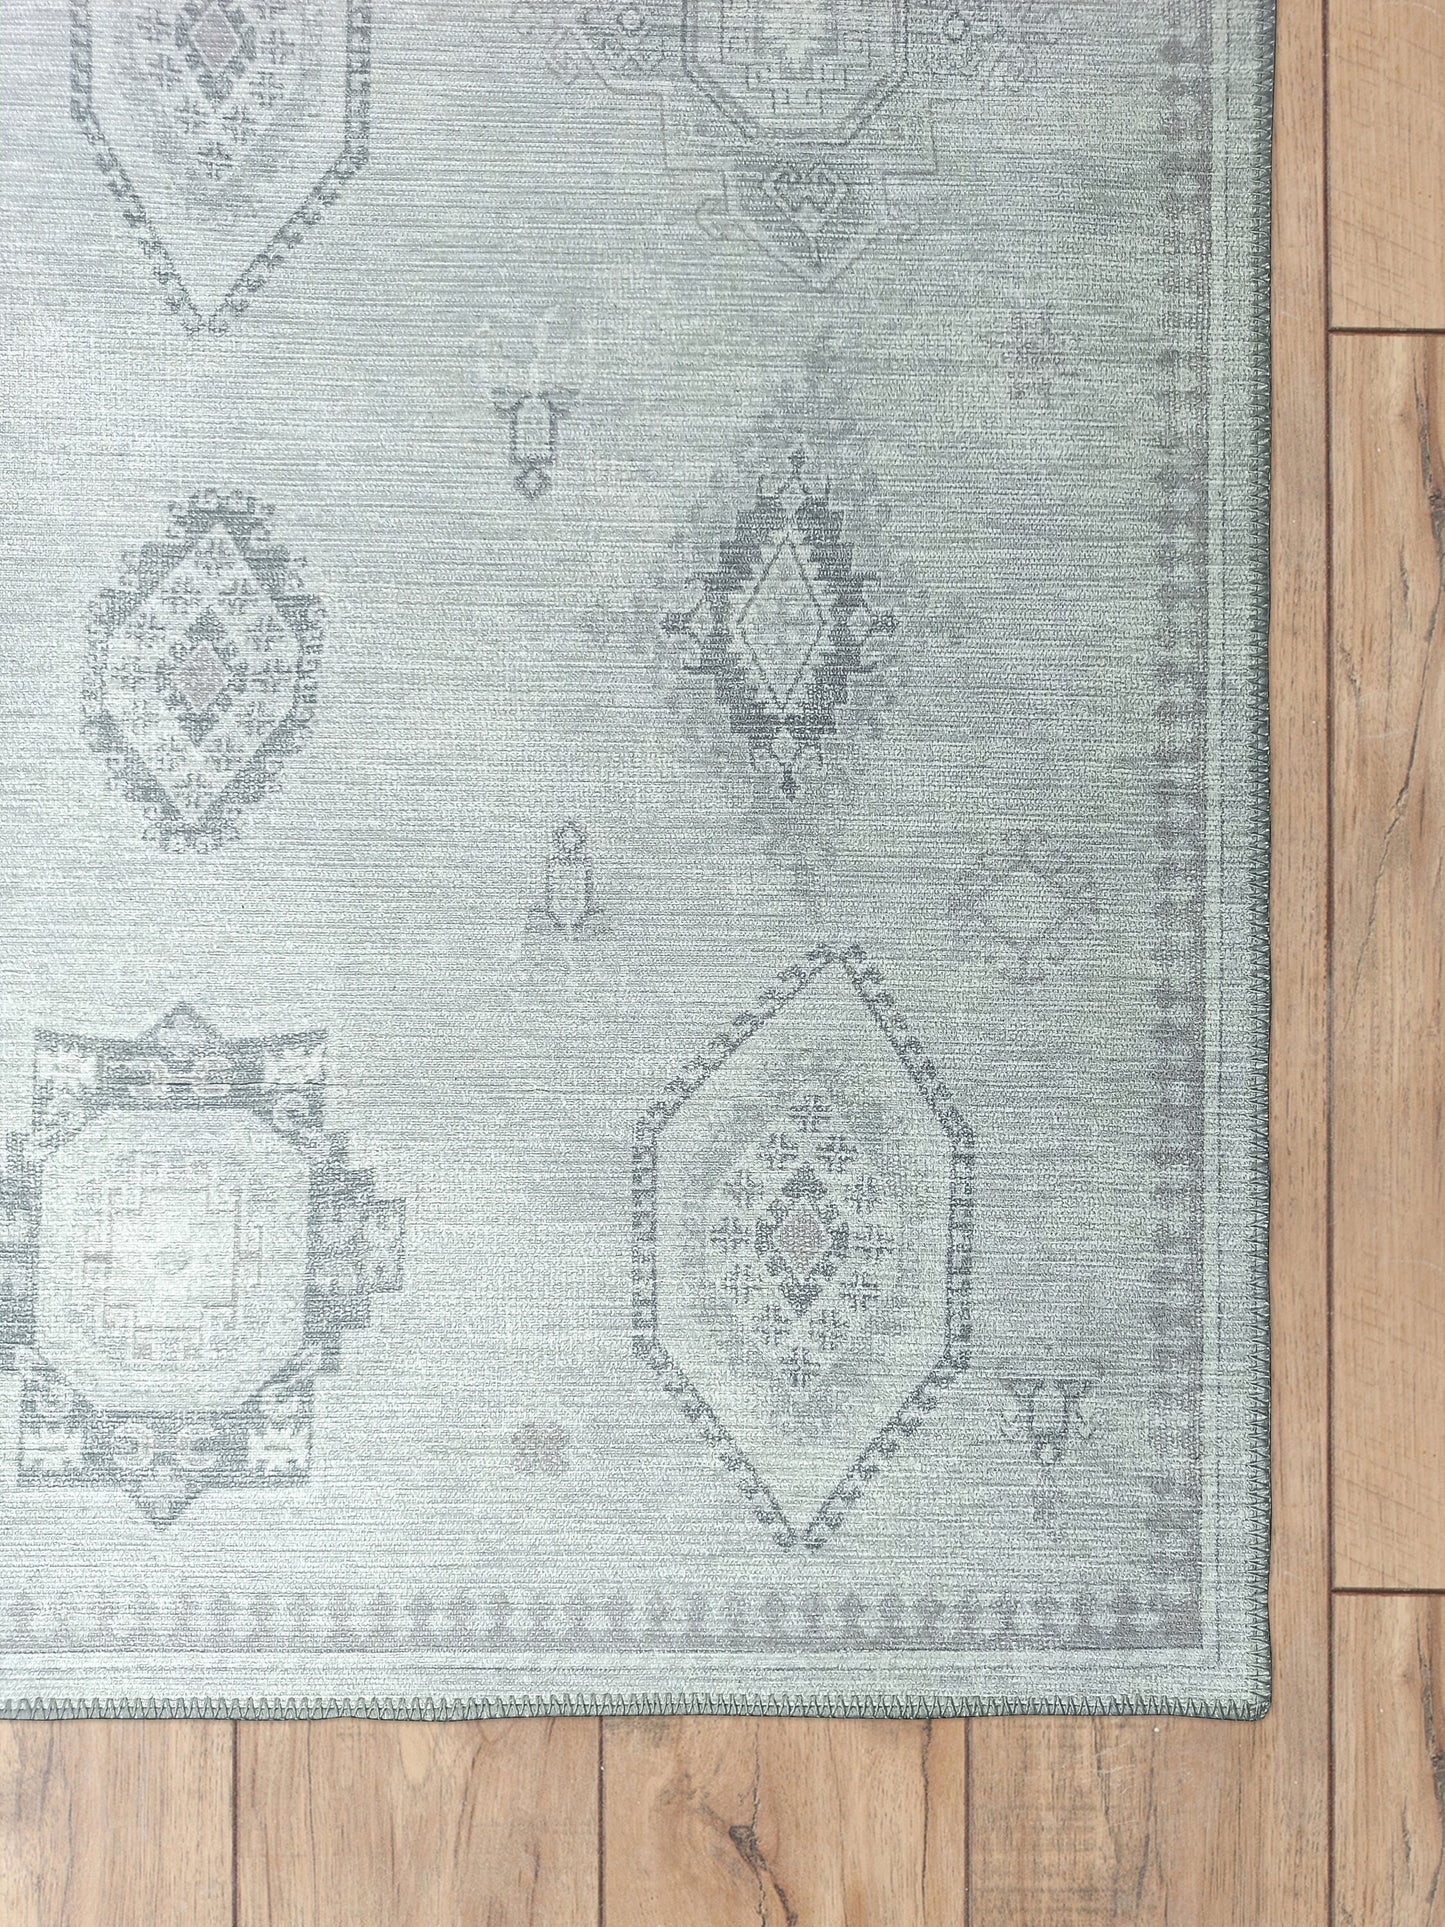 Neutral Antique Oushak Rug, Shades of Gray Silver Boho Luxury Turkish Geometric Vintage Persian Inspired Area Rugs Living room Bedroom Hall